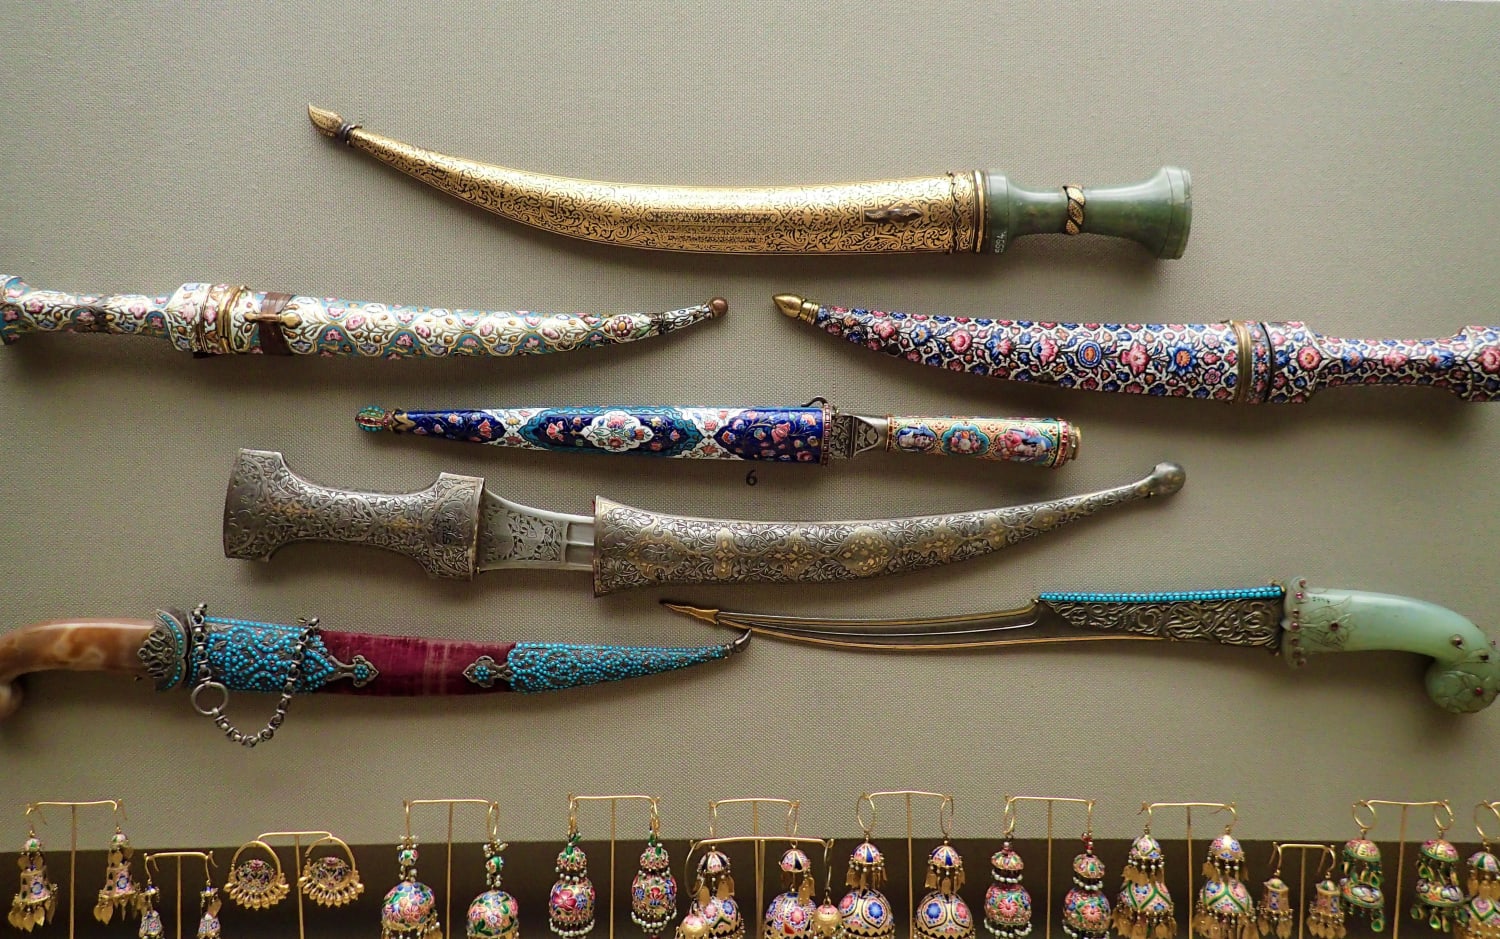 Assortment of 19th century Persian daggers with jade, enamelled, or metal handles, and a variety of intricately ornamented scabbards. At the bottom are earrings also dating from the Qajar era. Photo taken at the Benaki Museum of Islamic Art, Athens.